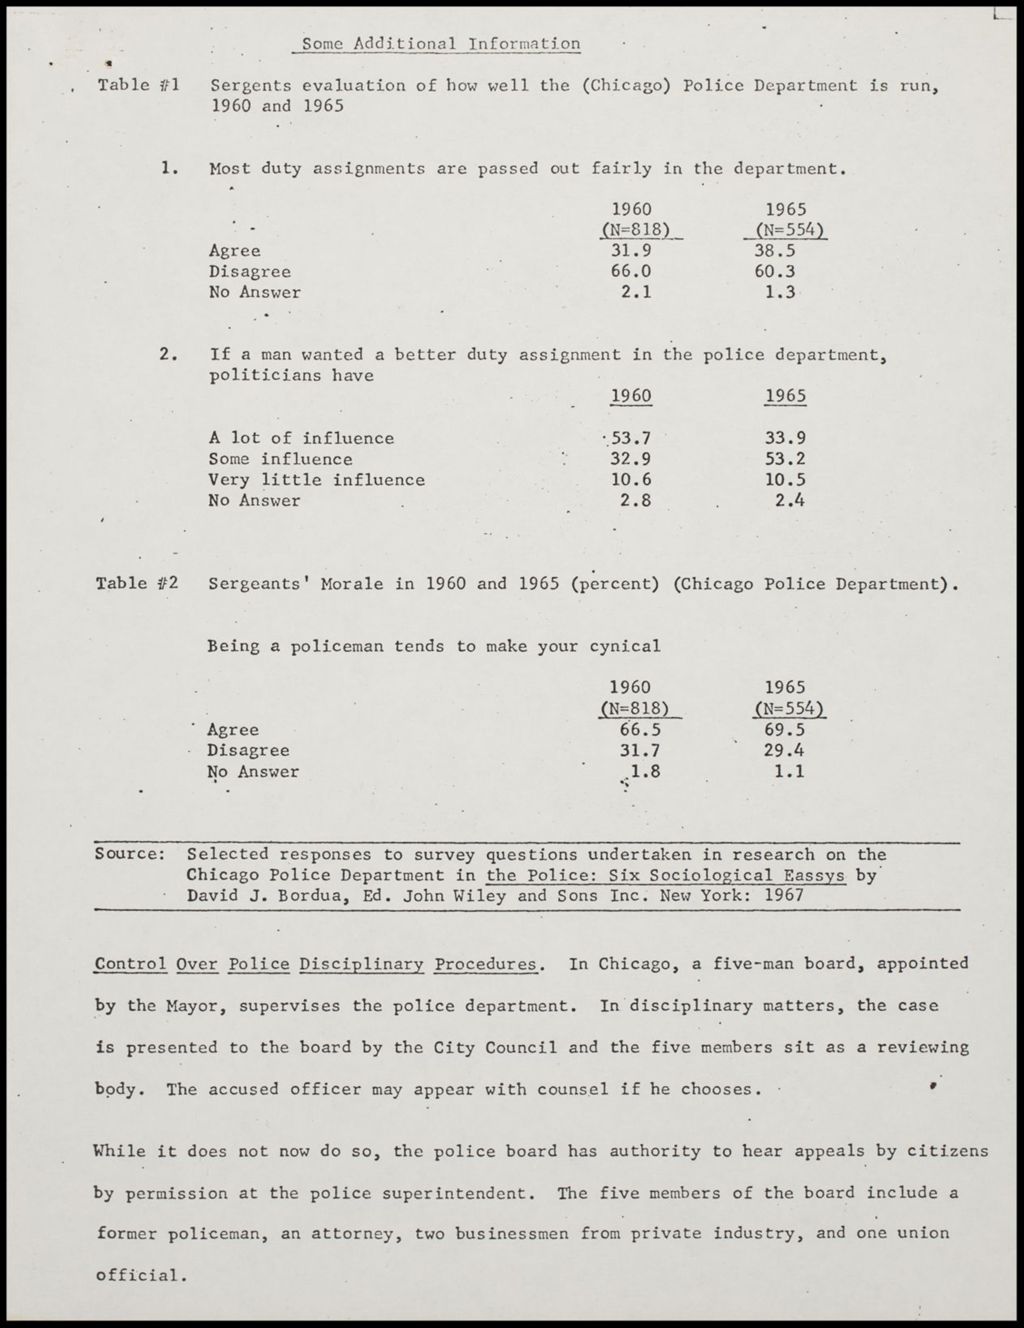 Miniature of Race Relations and Law Enforcement research, undated (Folder III-1965)